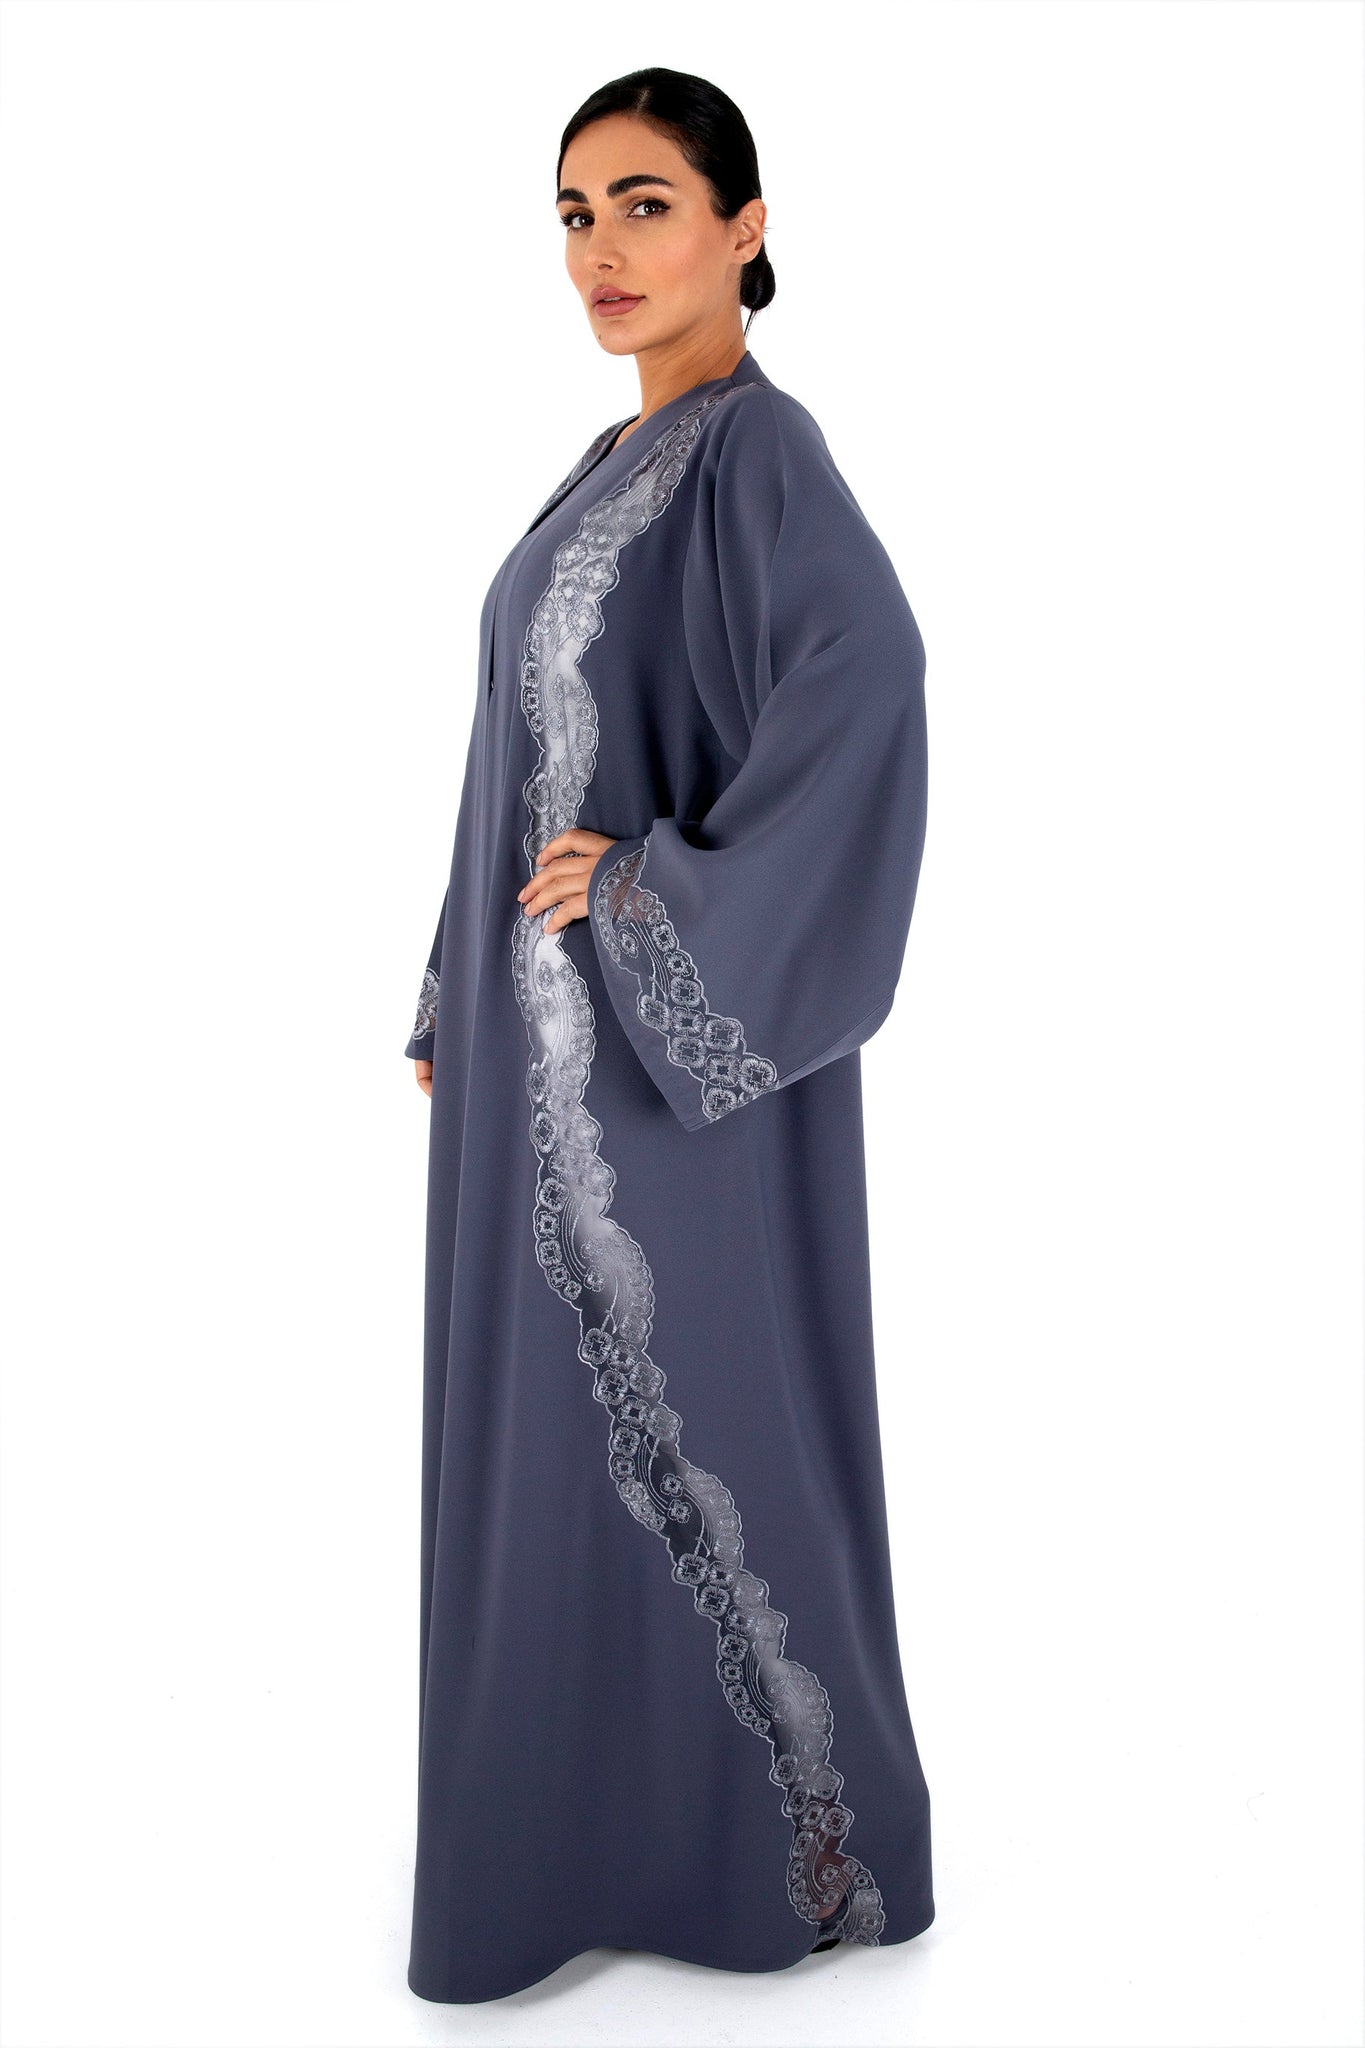 Hanayen Classic Colored Abaya patched with intricate Machine embroidery lace and no side seam